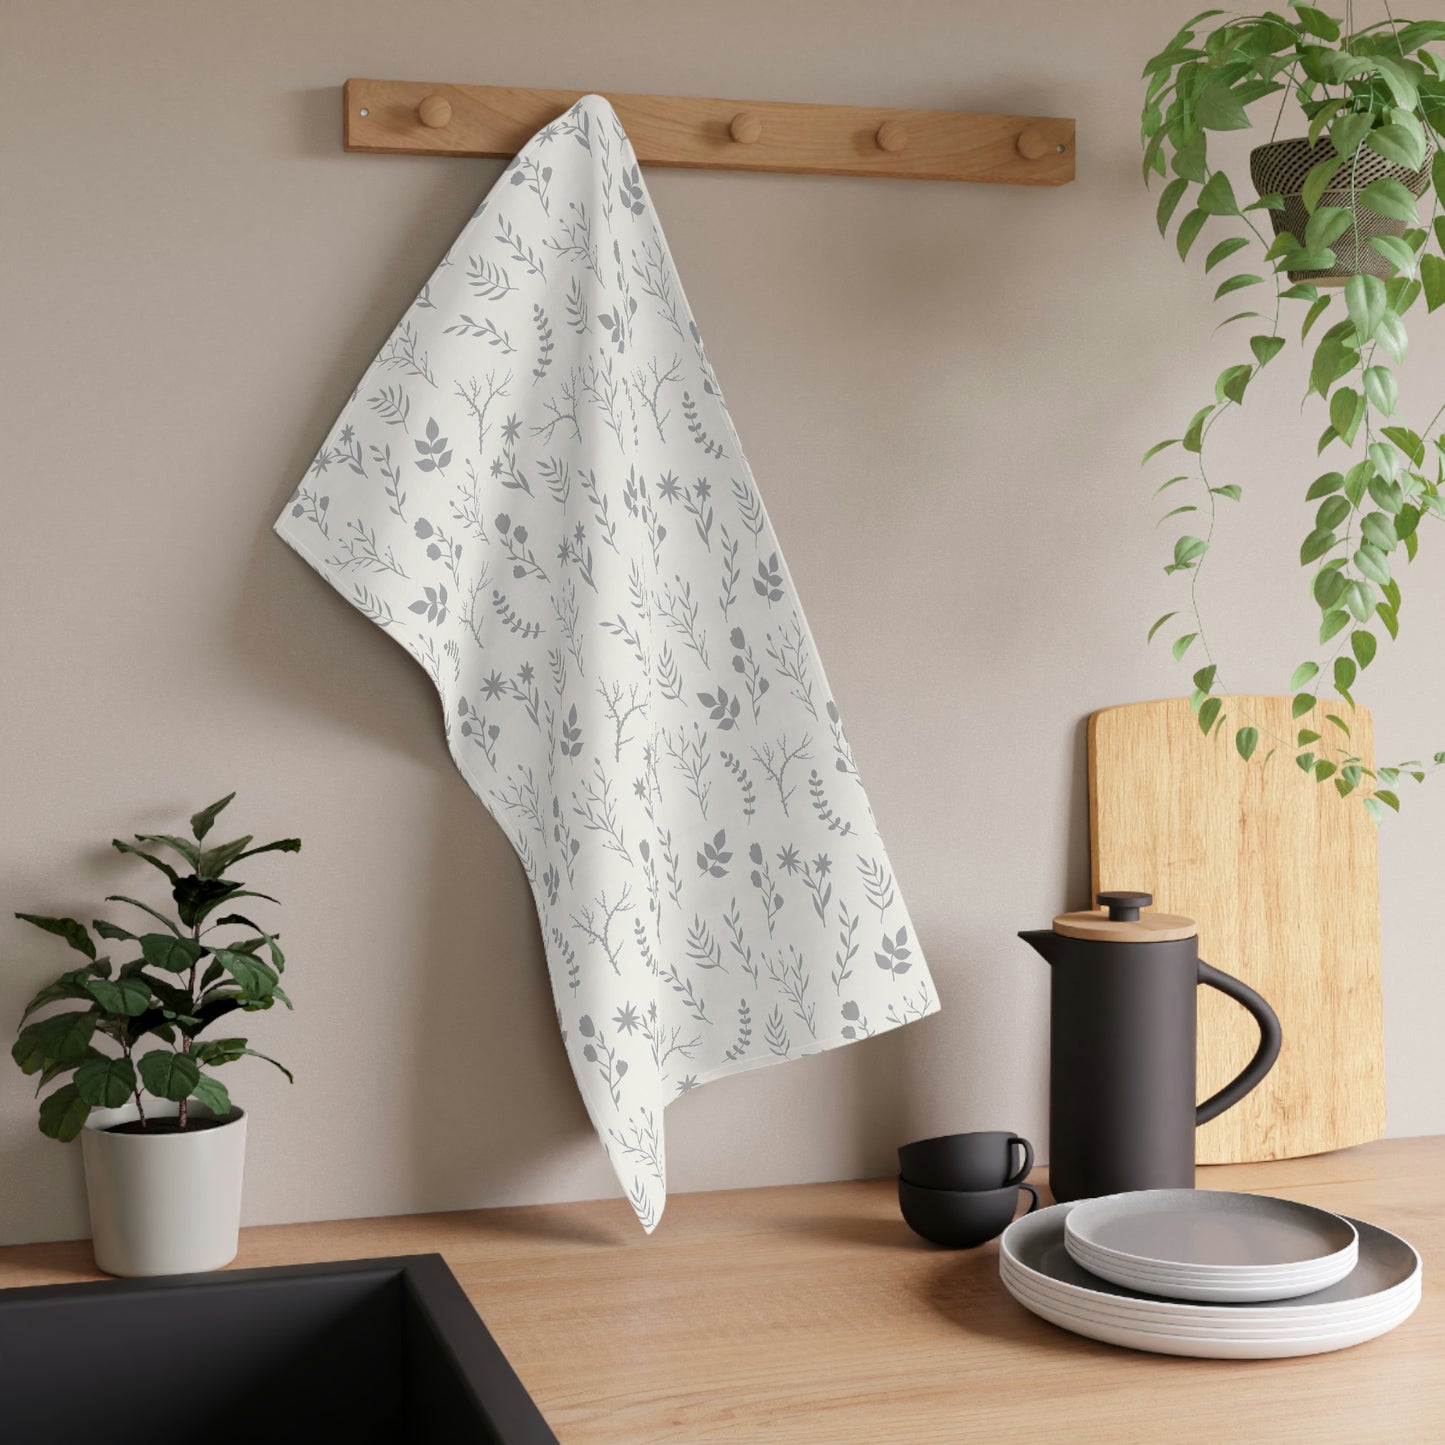 Grey and White Floral Dish Towel